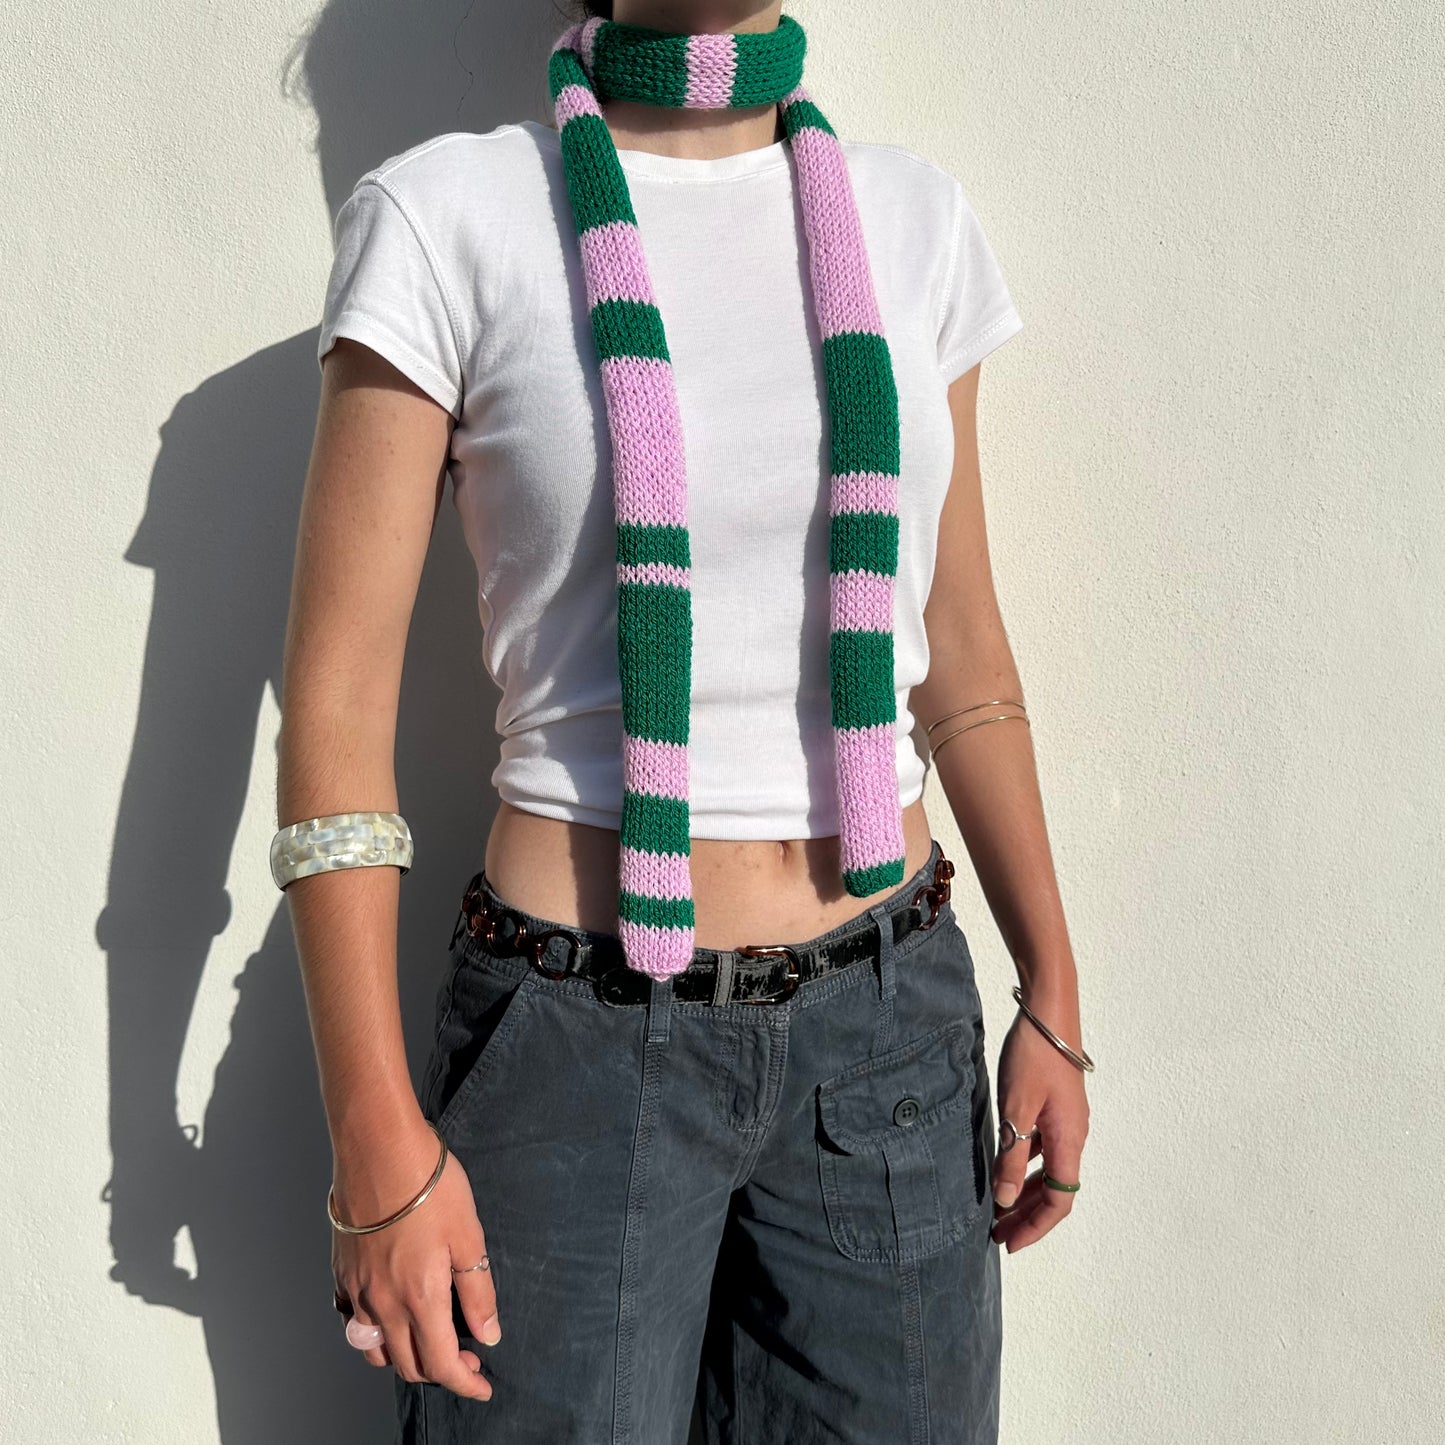 Handmade knitted stripy skinny scarf in baby pink and green